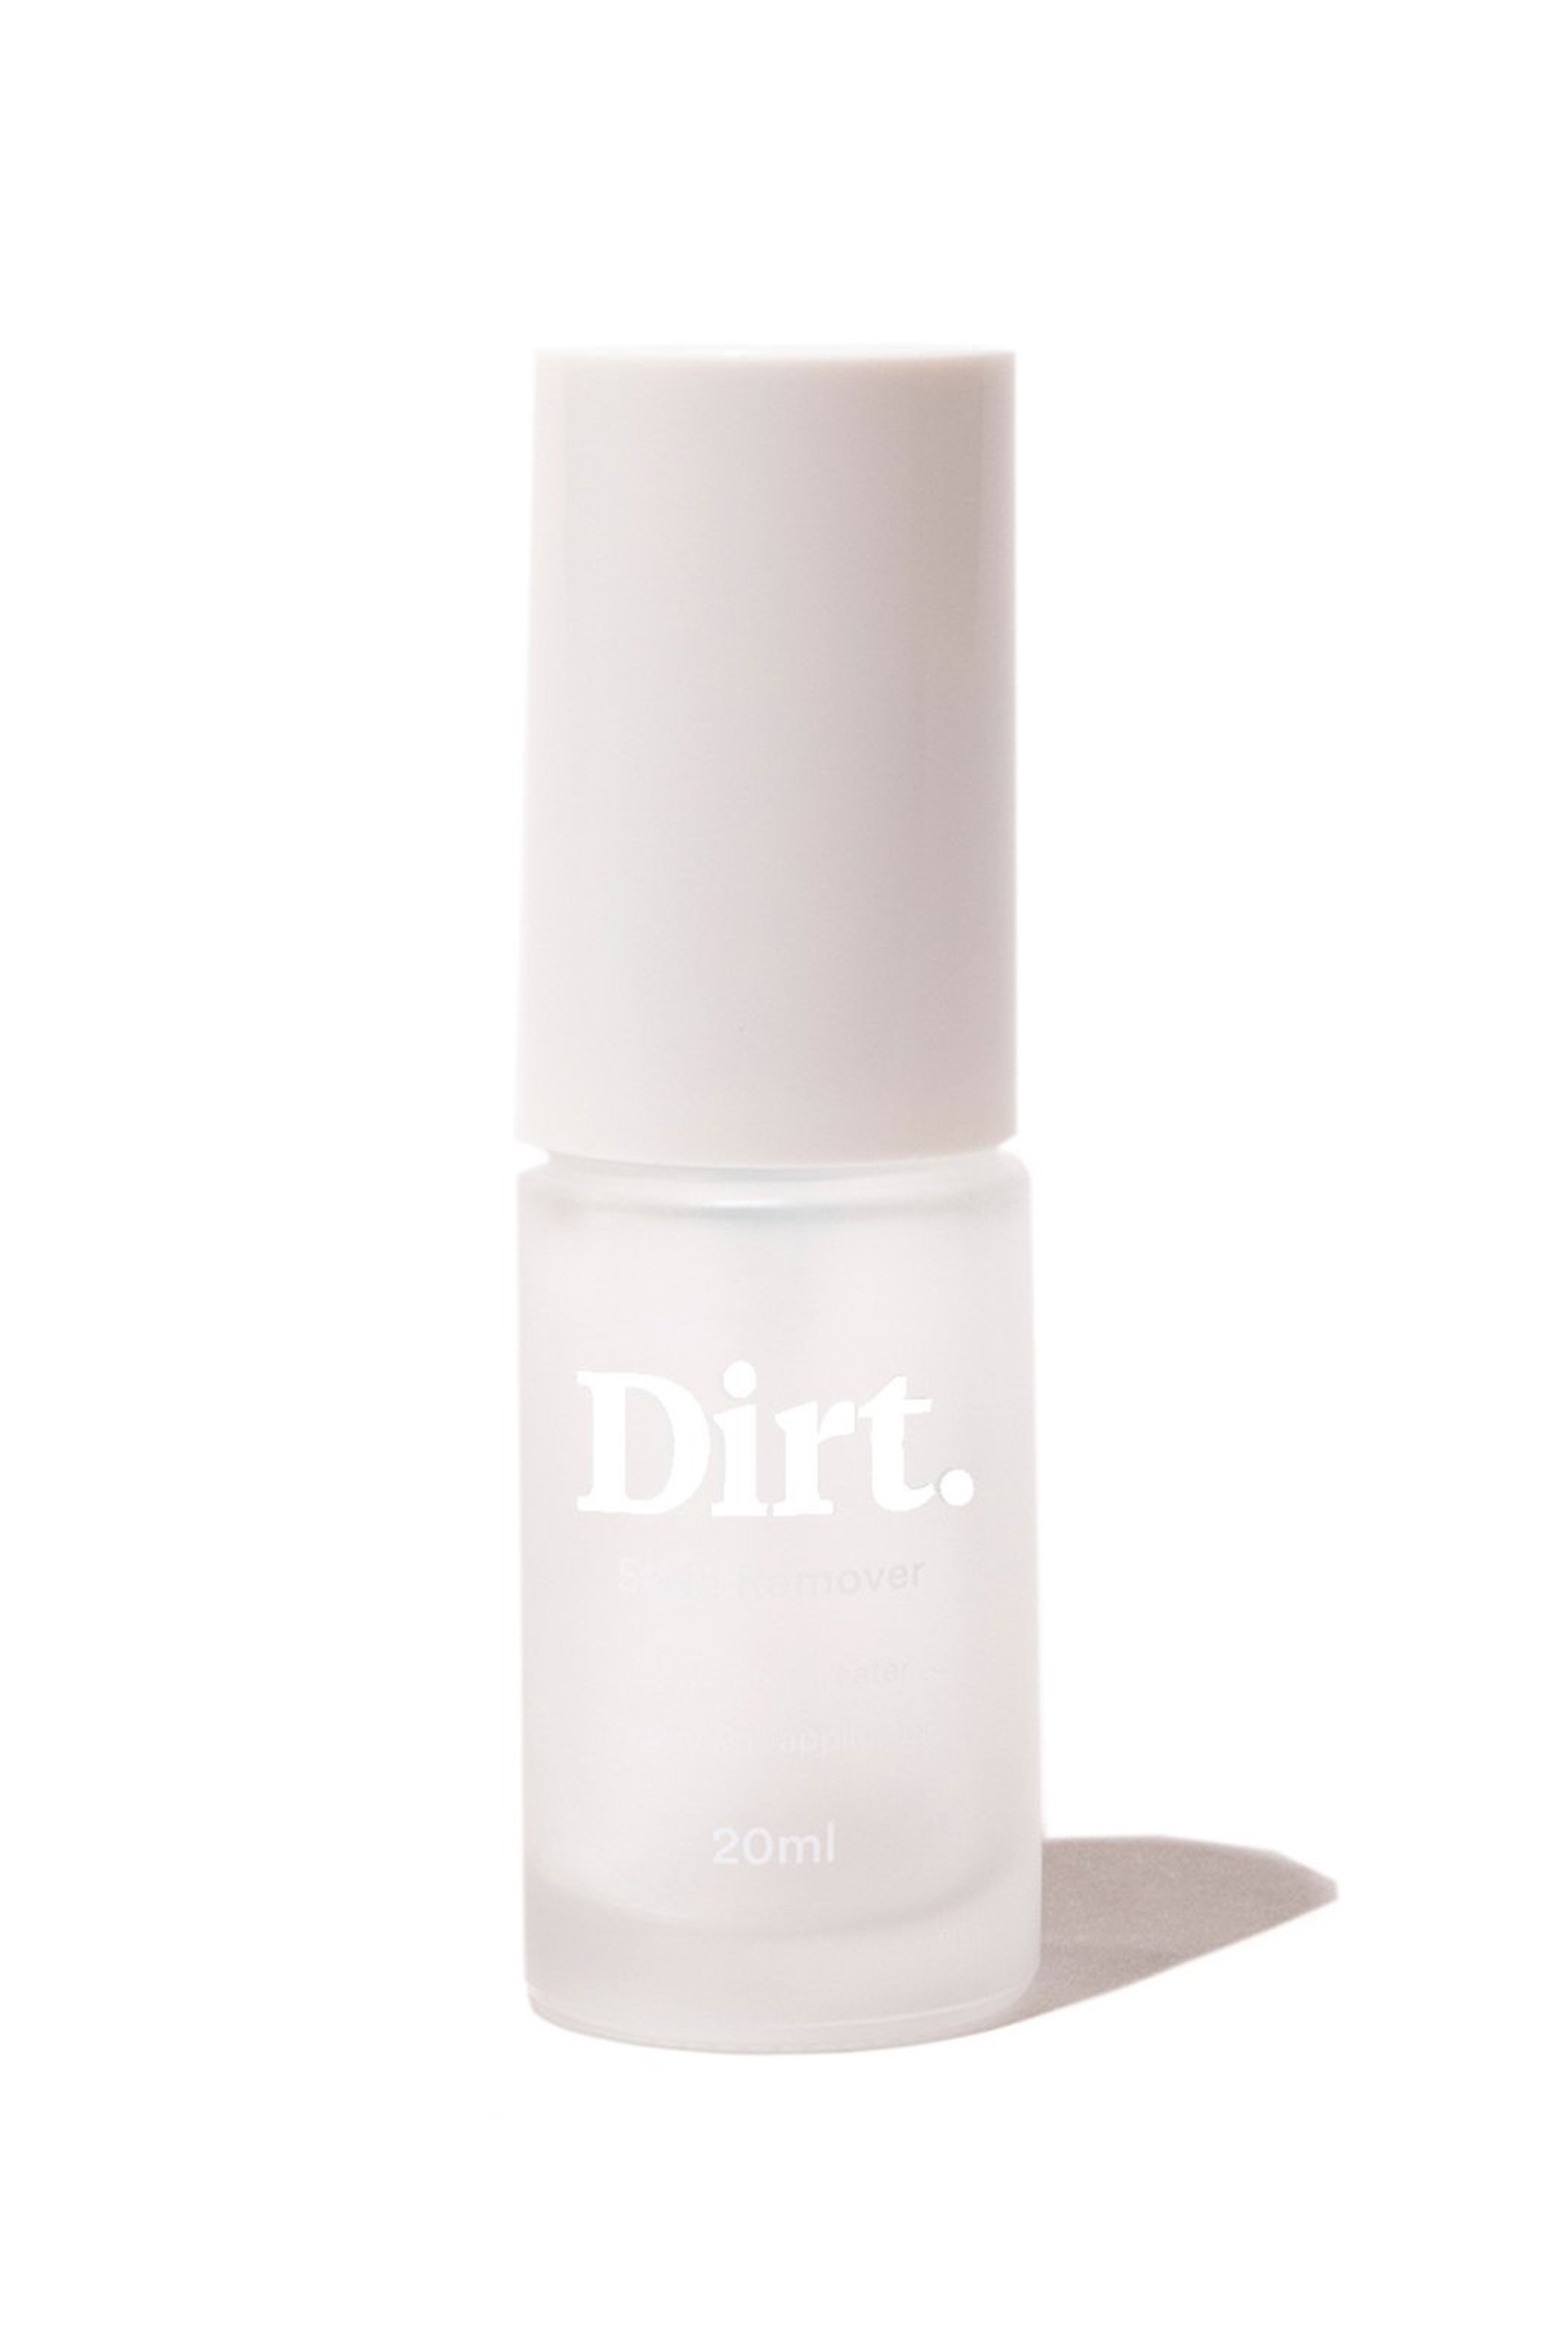 Cotton On Foundation - Dirt Stain Removal Carry On Applicator - 20ml bottle